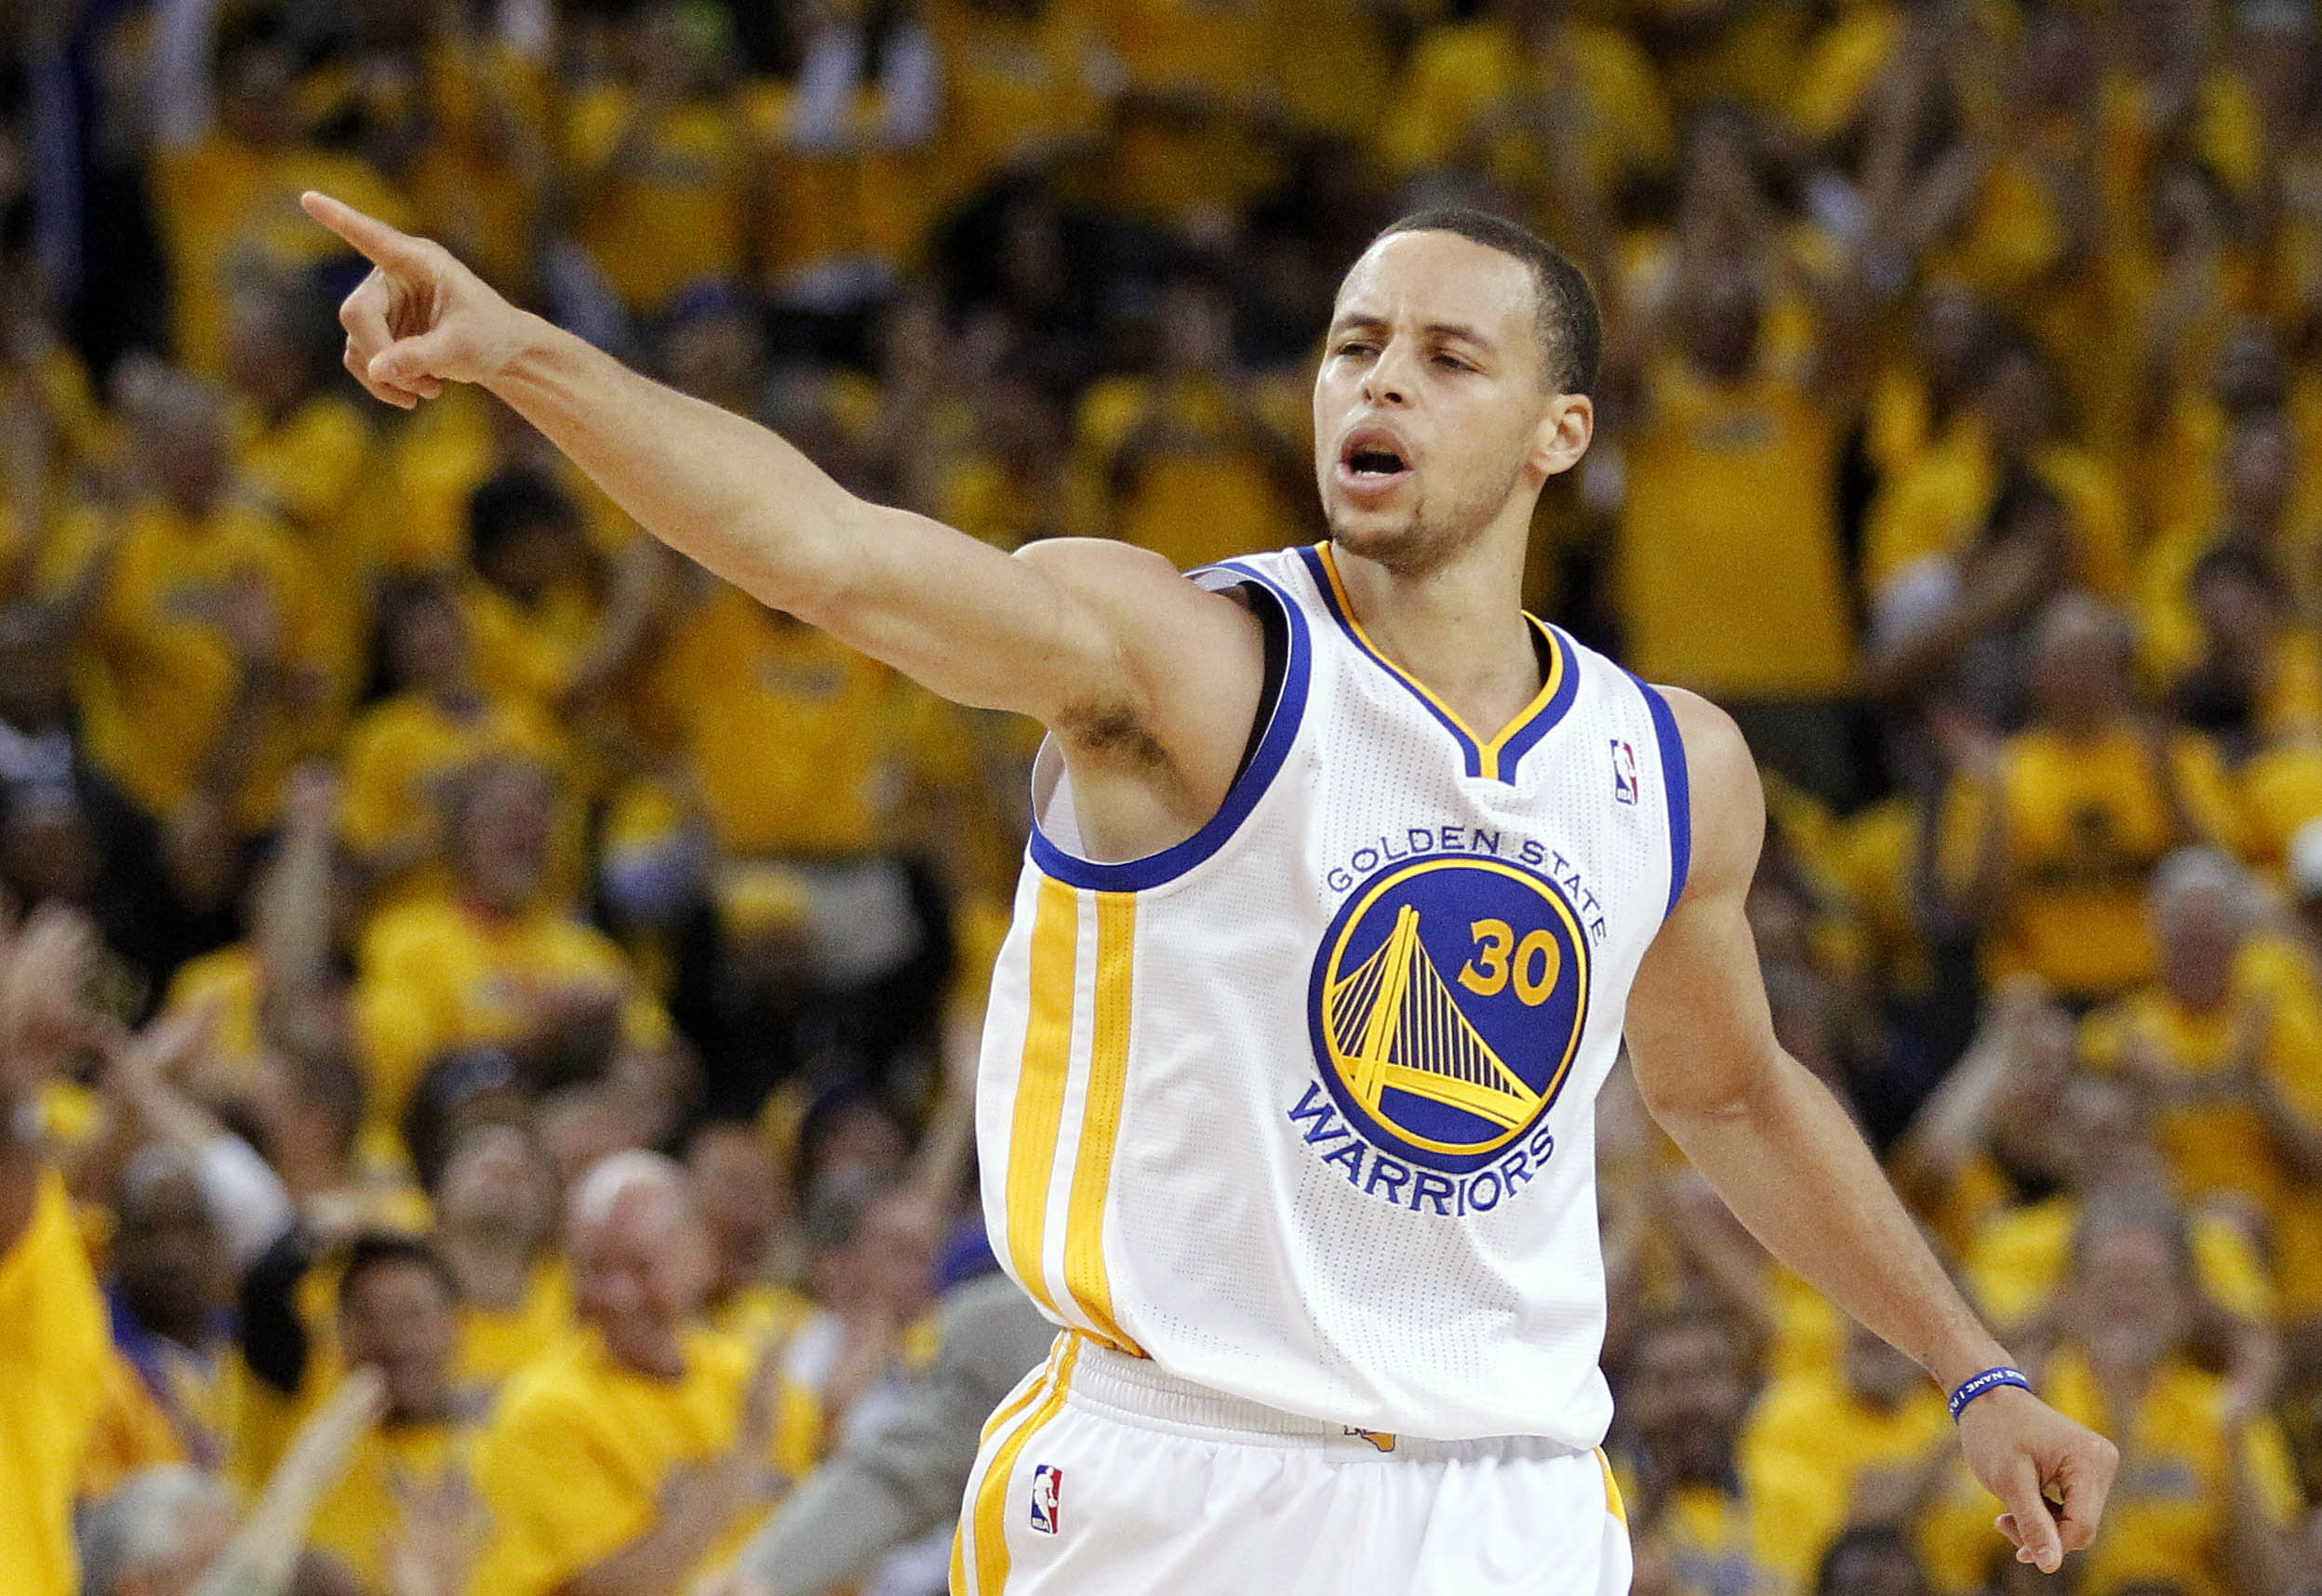 Courtesy of USA Today: Curry might help lure big names to Oakland. 